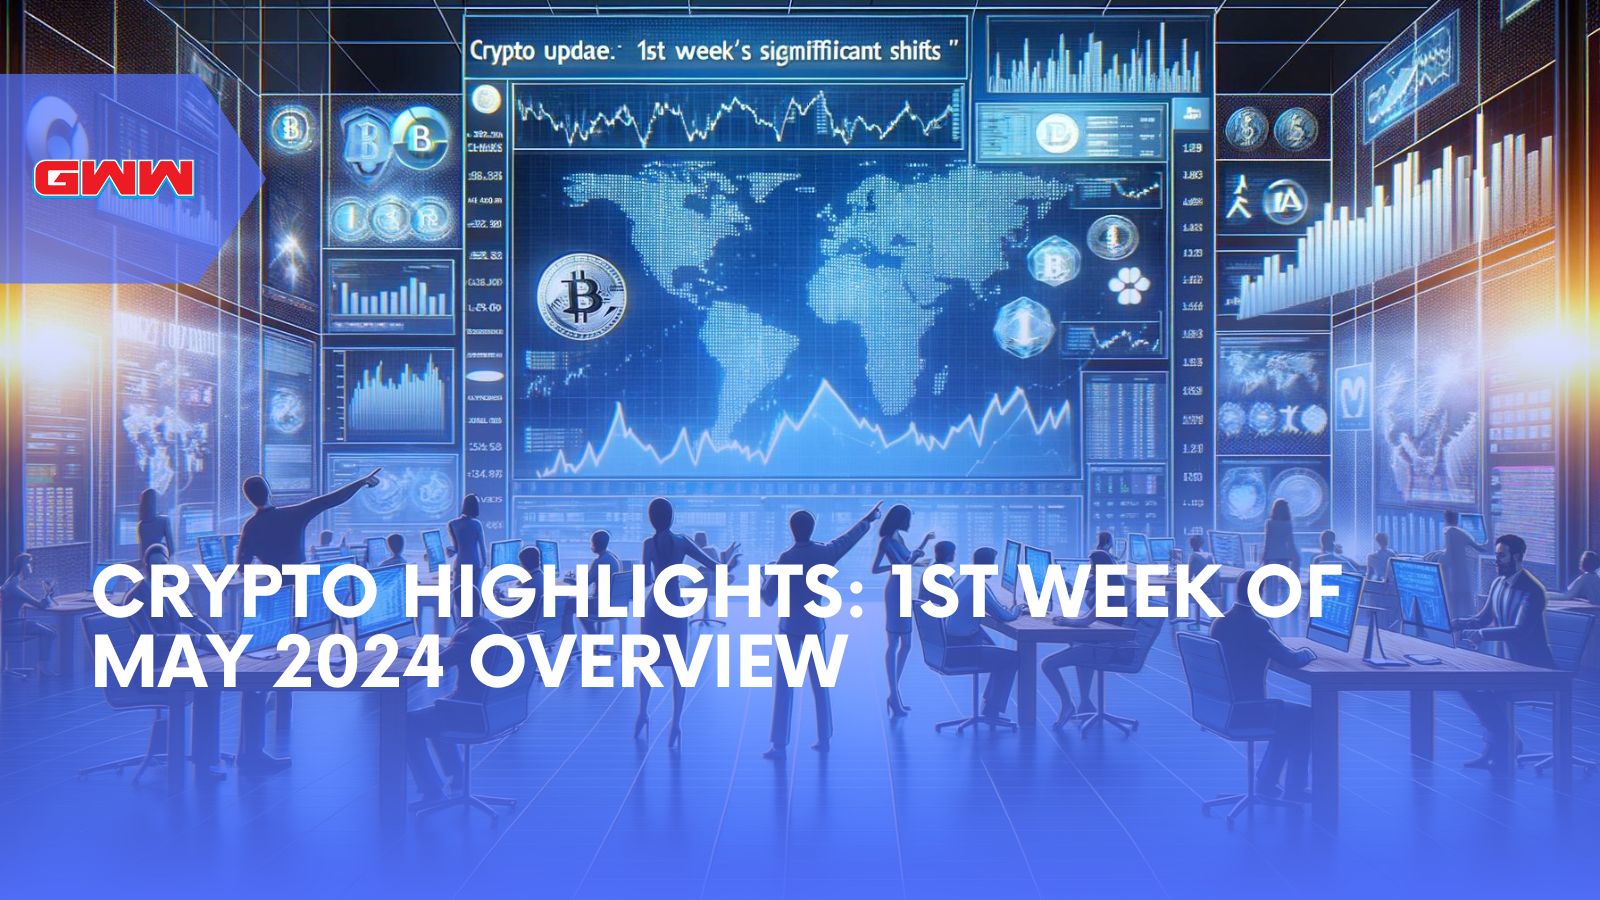 Crypto Highlights: 1st week of May 2024 Overview